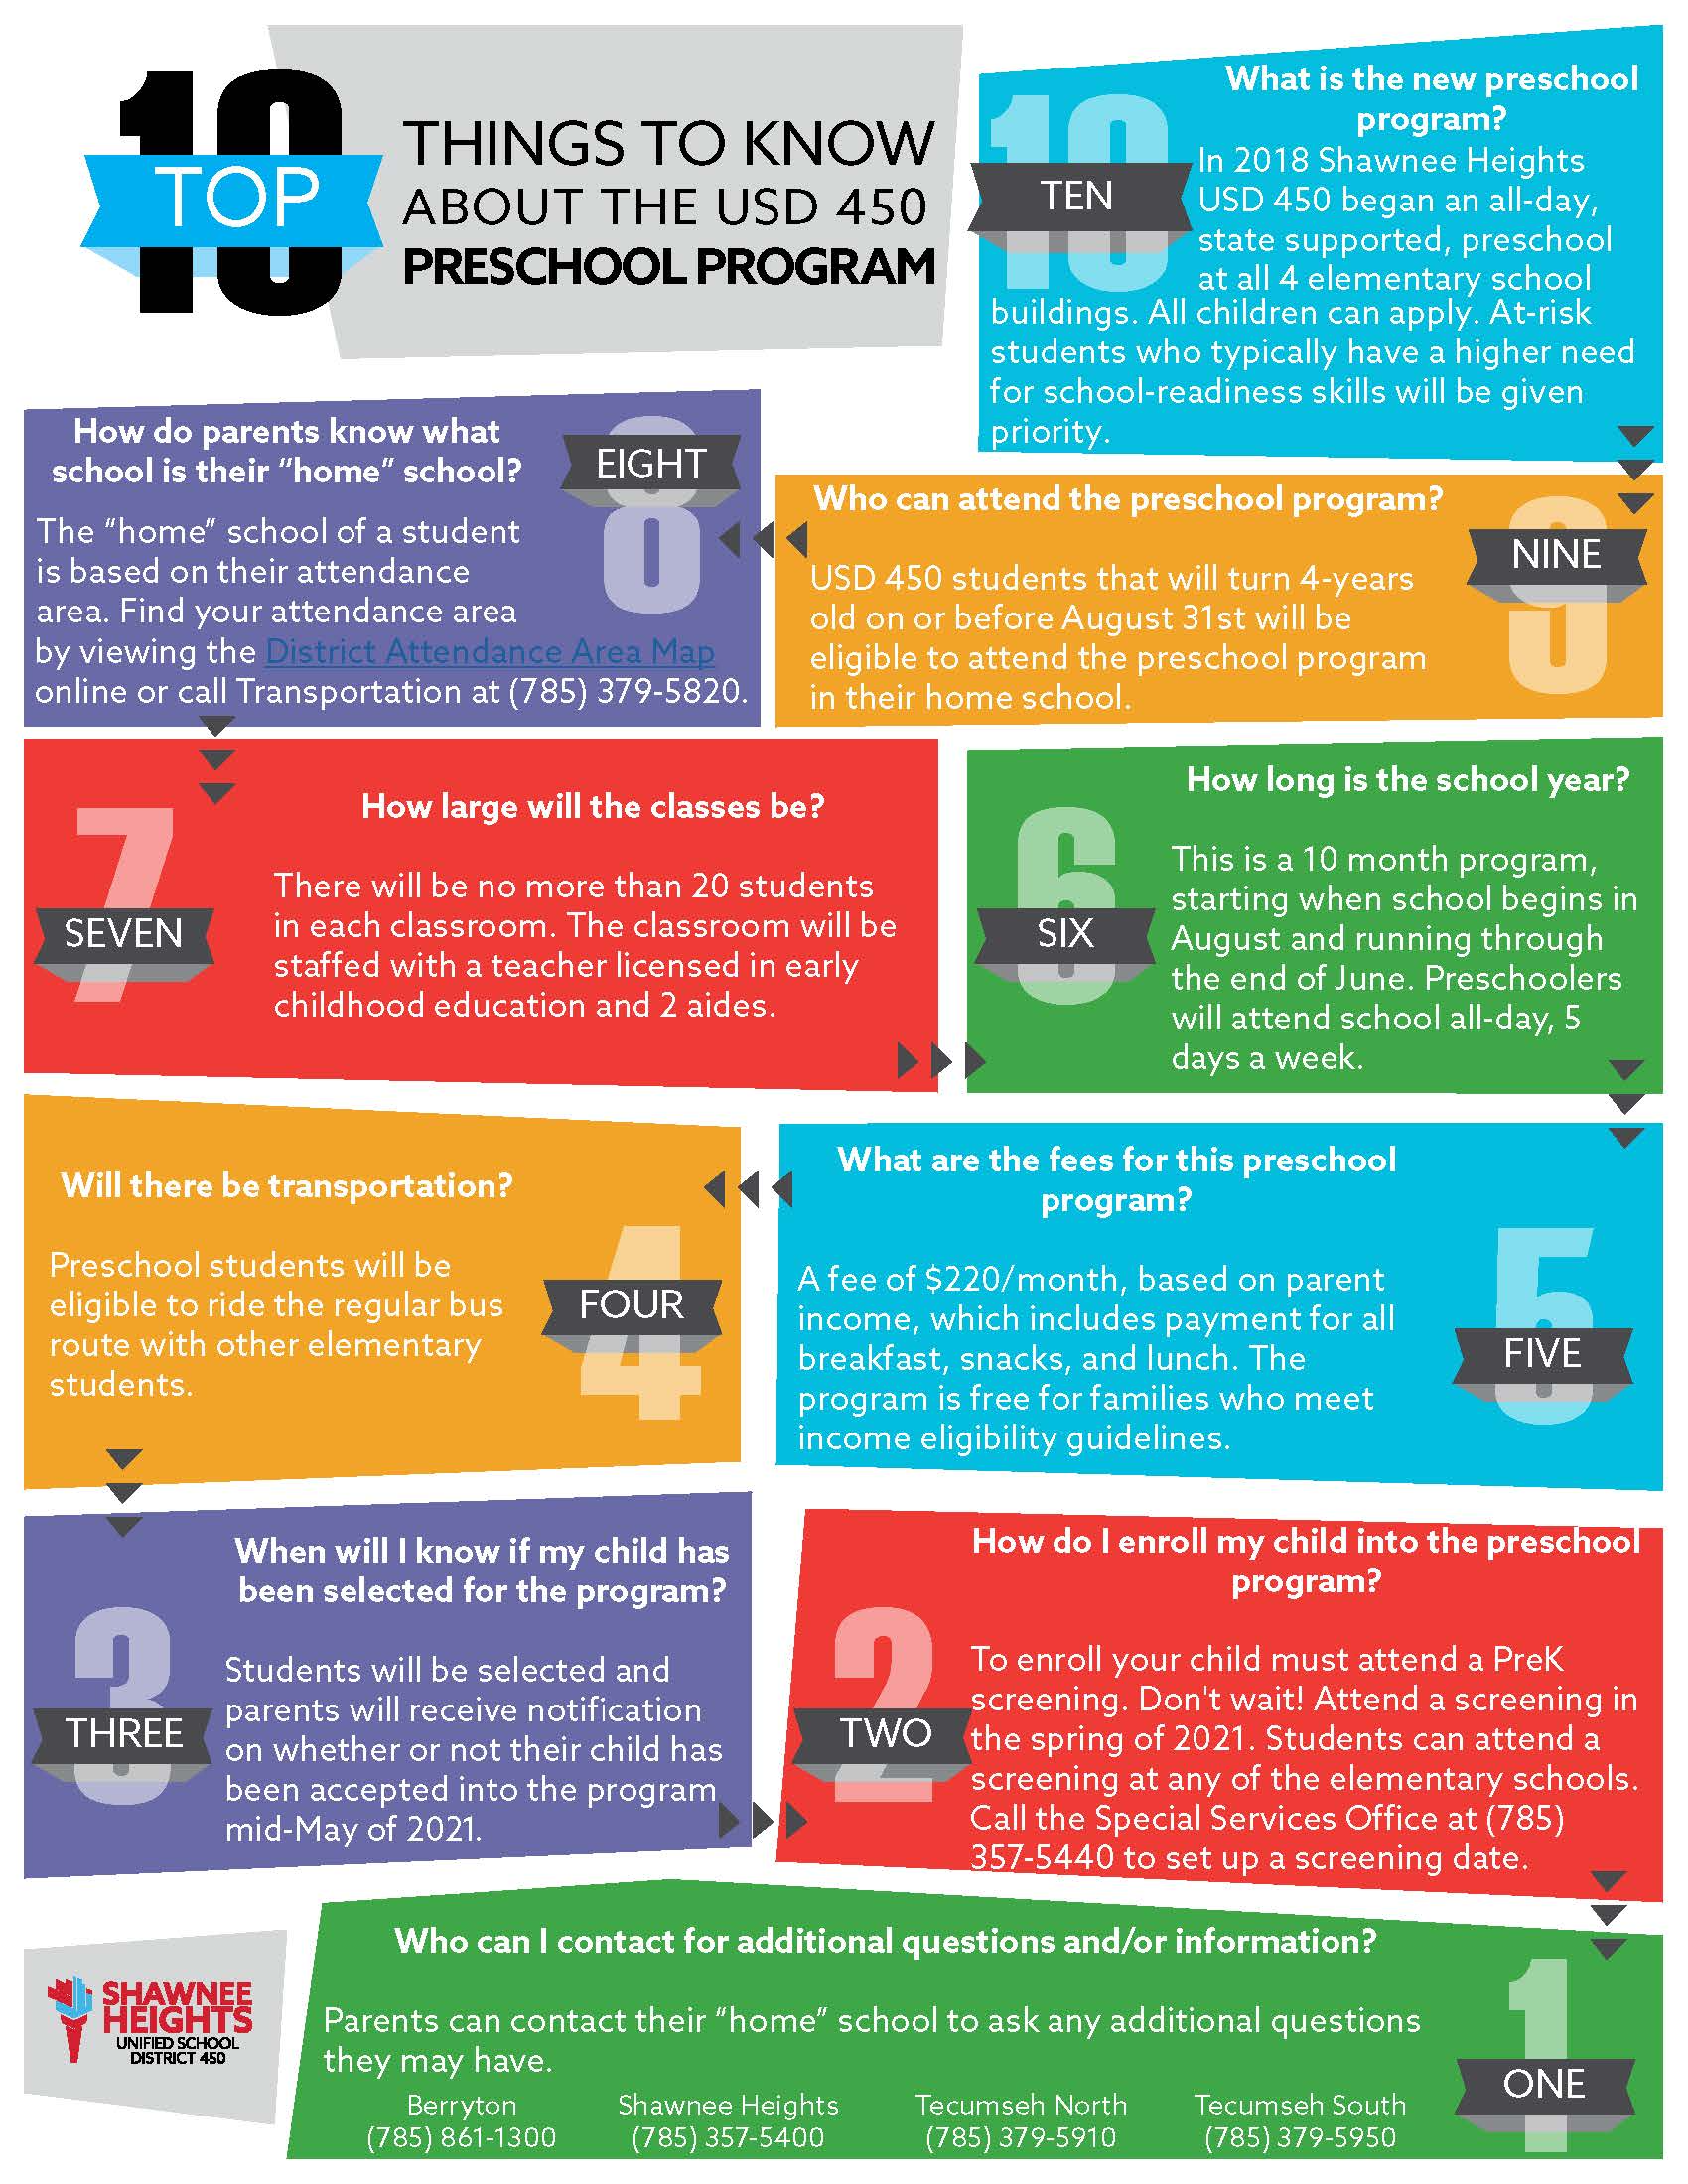 Top 10 Things to Know About the USD 450 Preschool Program